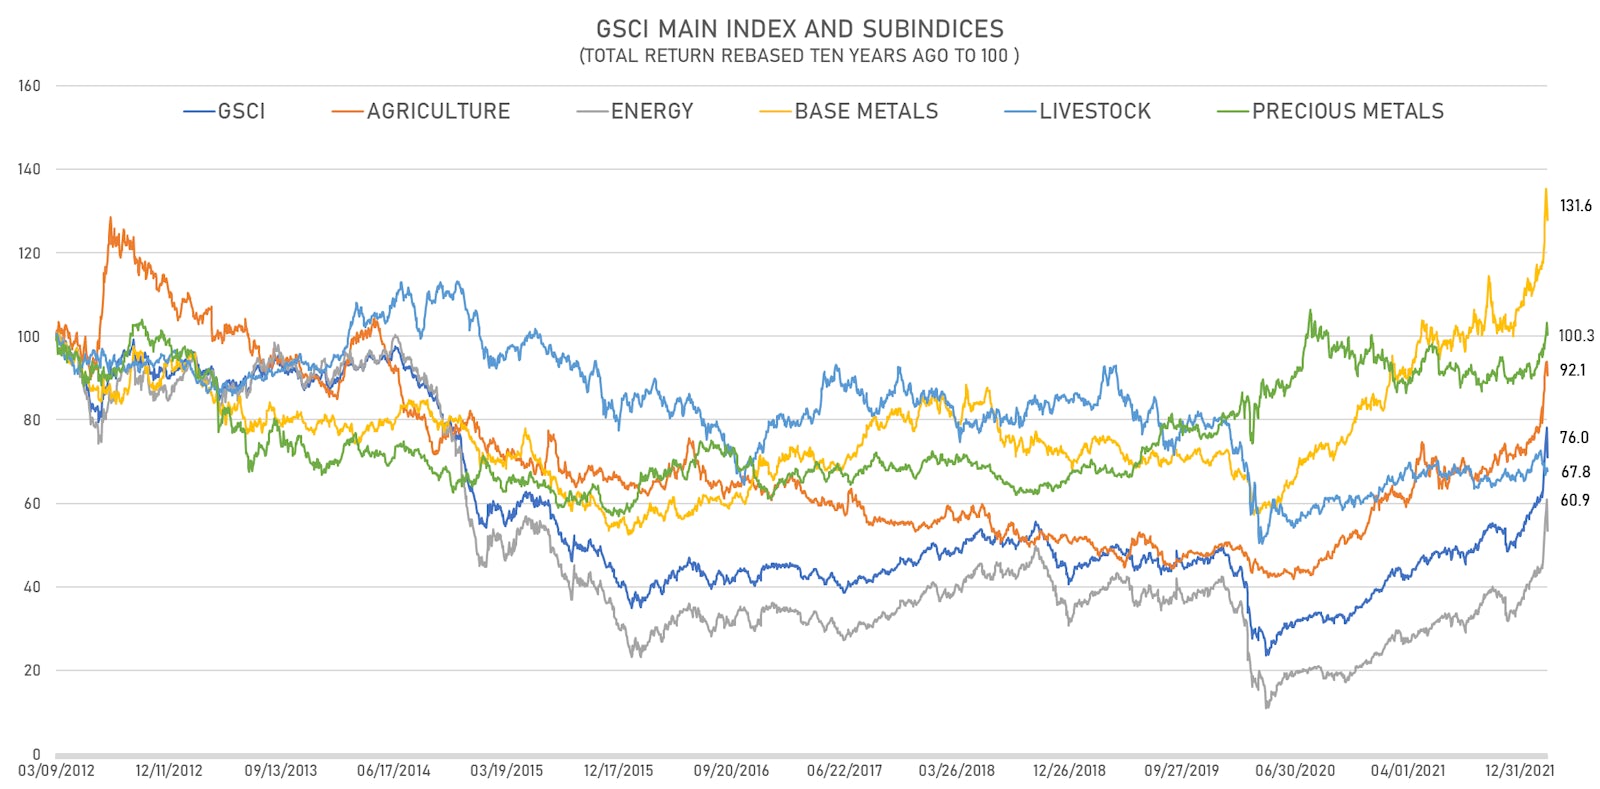 S&P GSCI Sub Indices Total Returns Over The Past 10 Years (Rebased to 100) | Sources: ϕpost, Refinitiv data